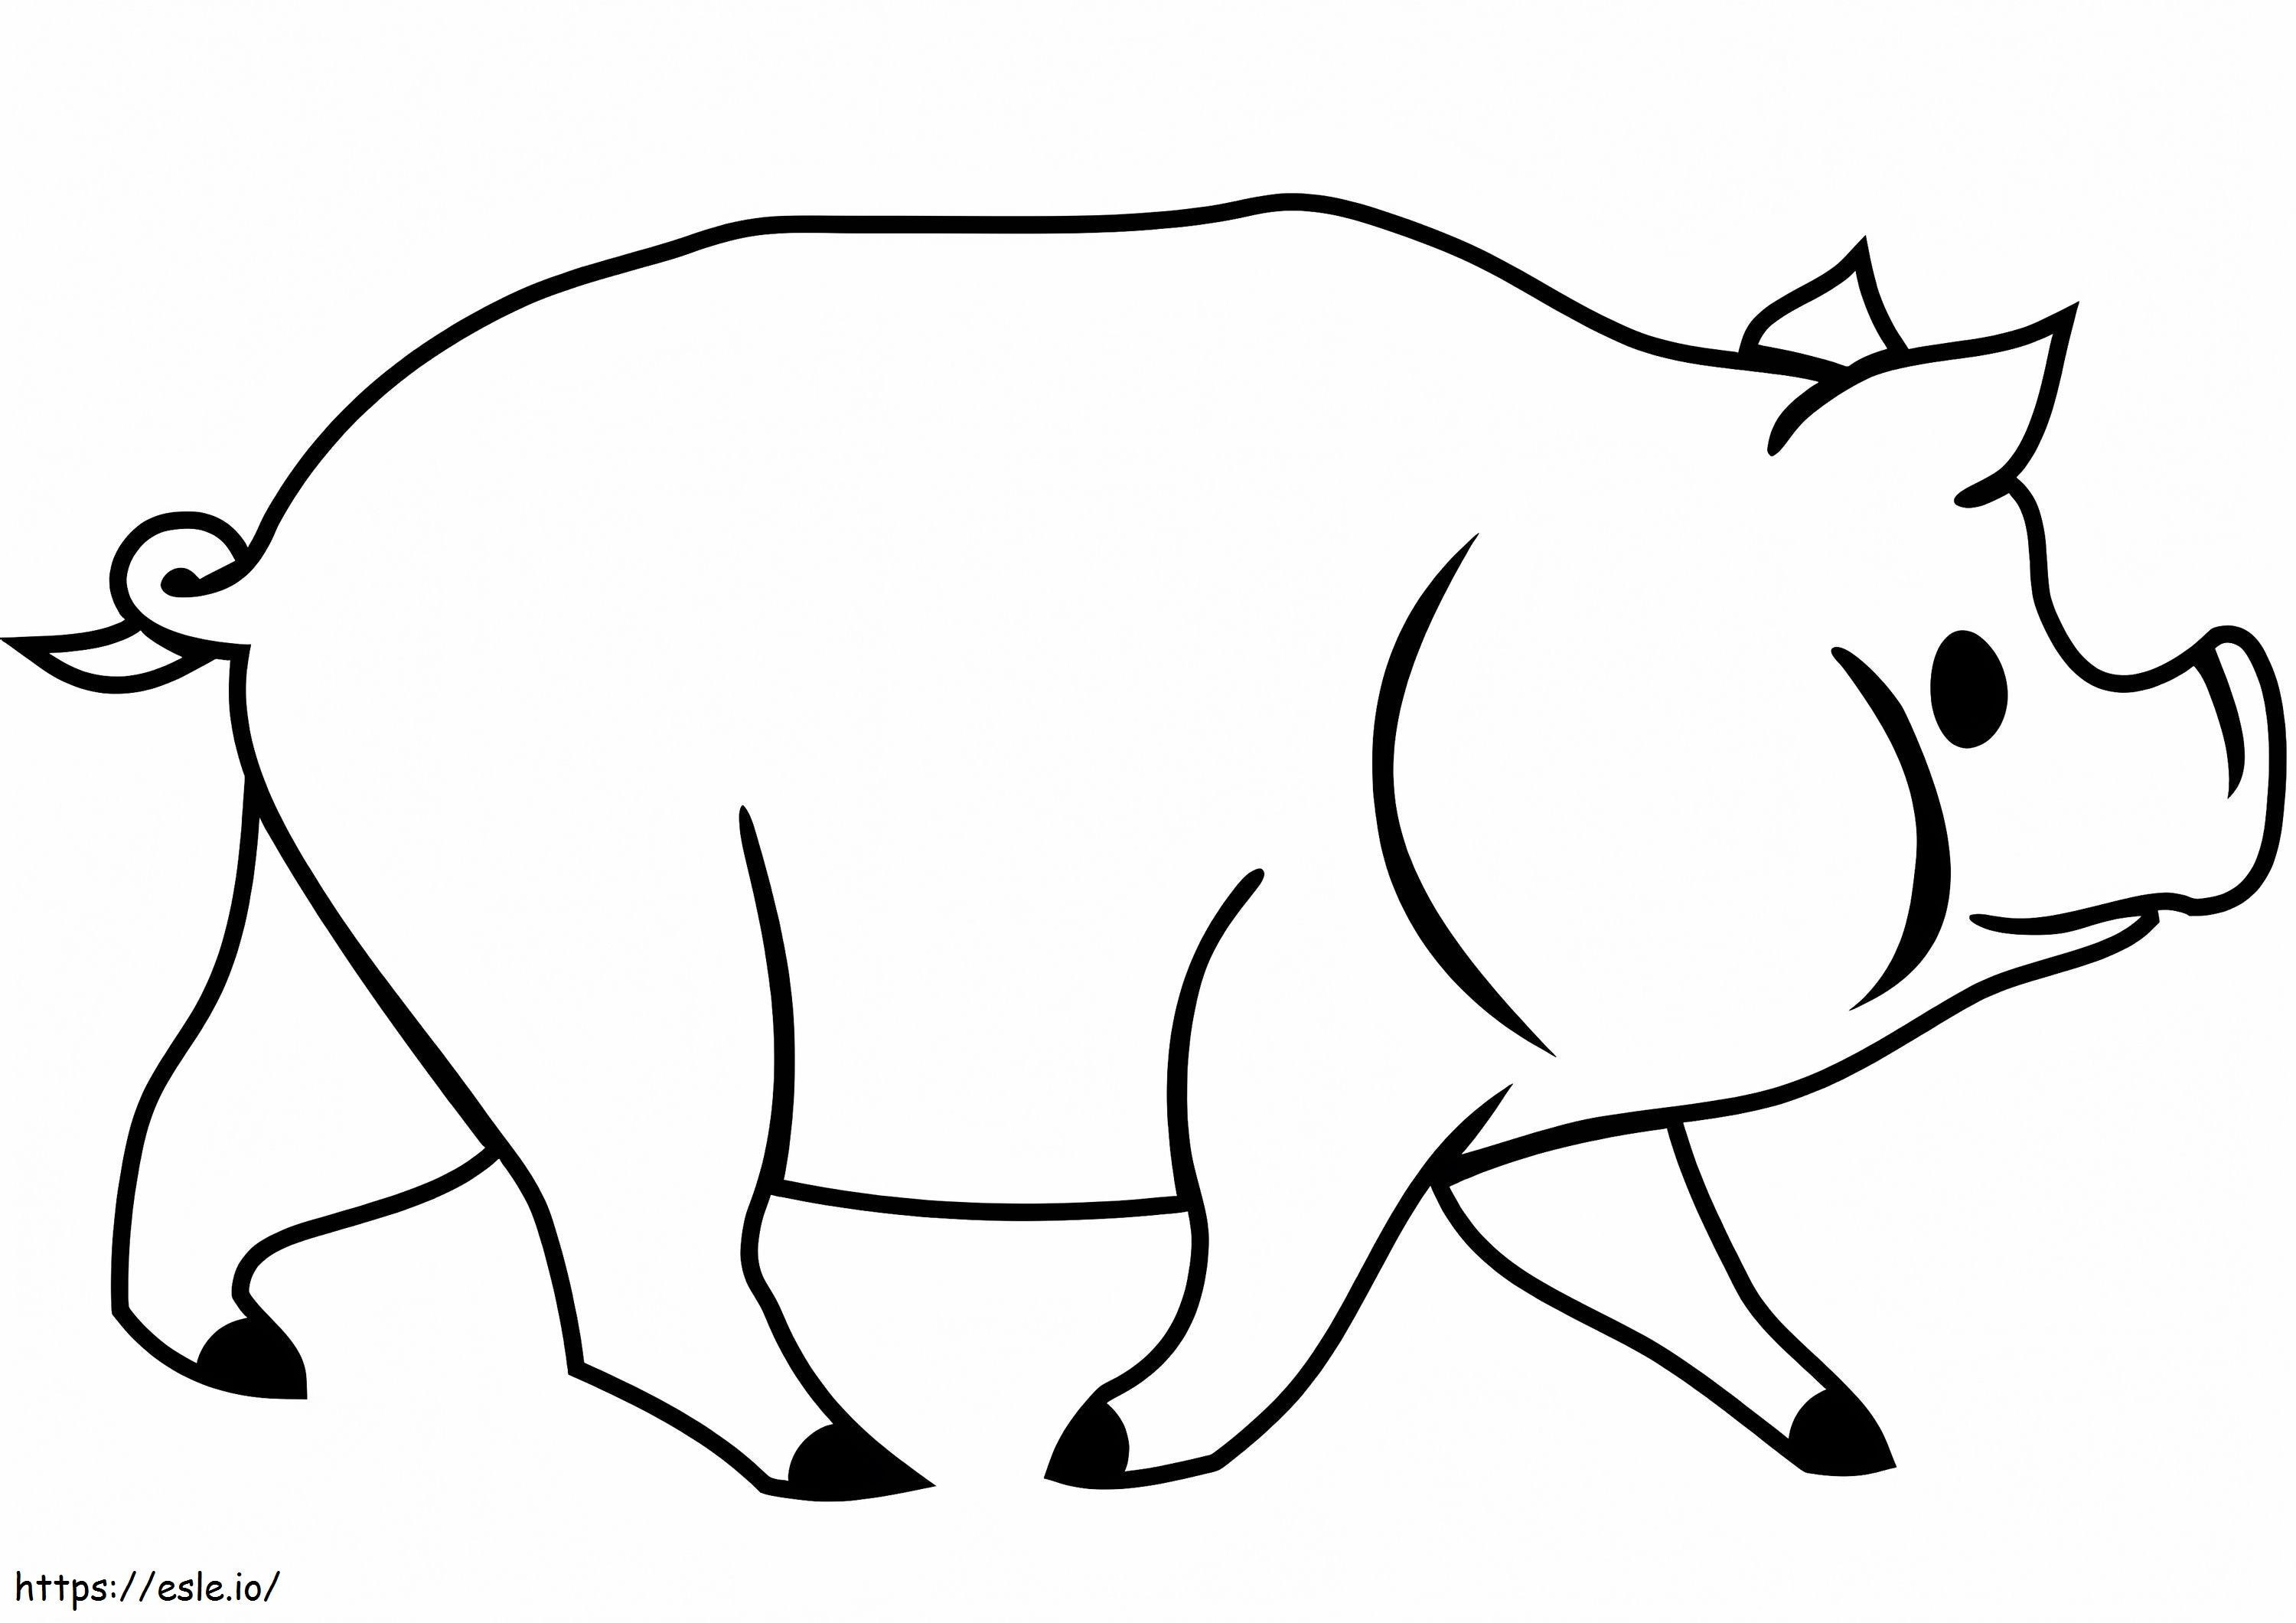 Pig 4 coloring page